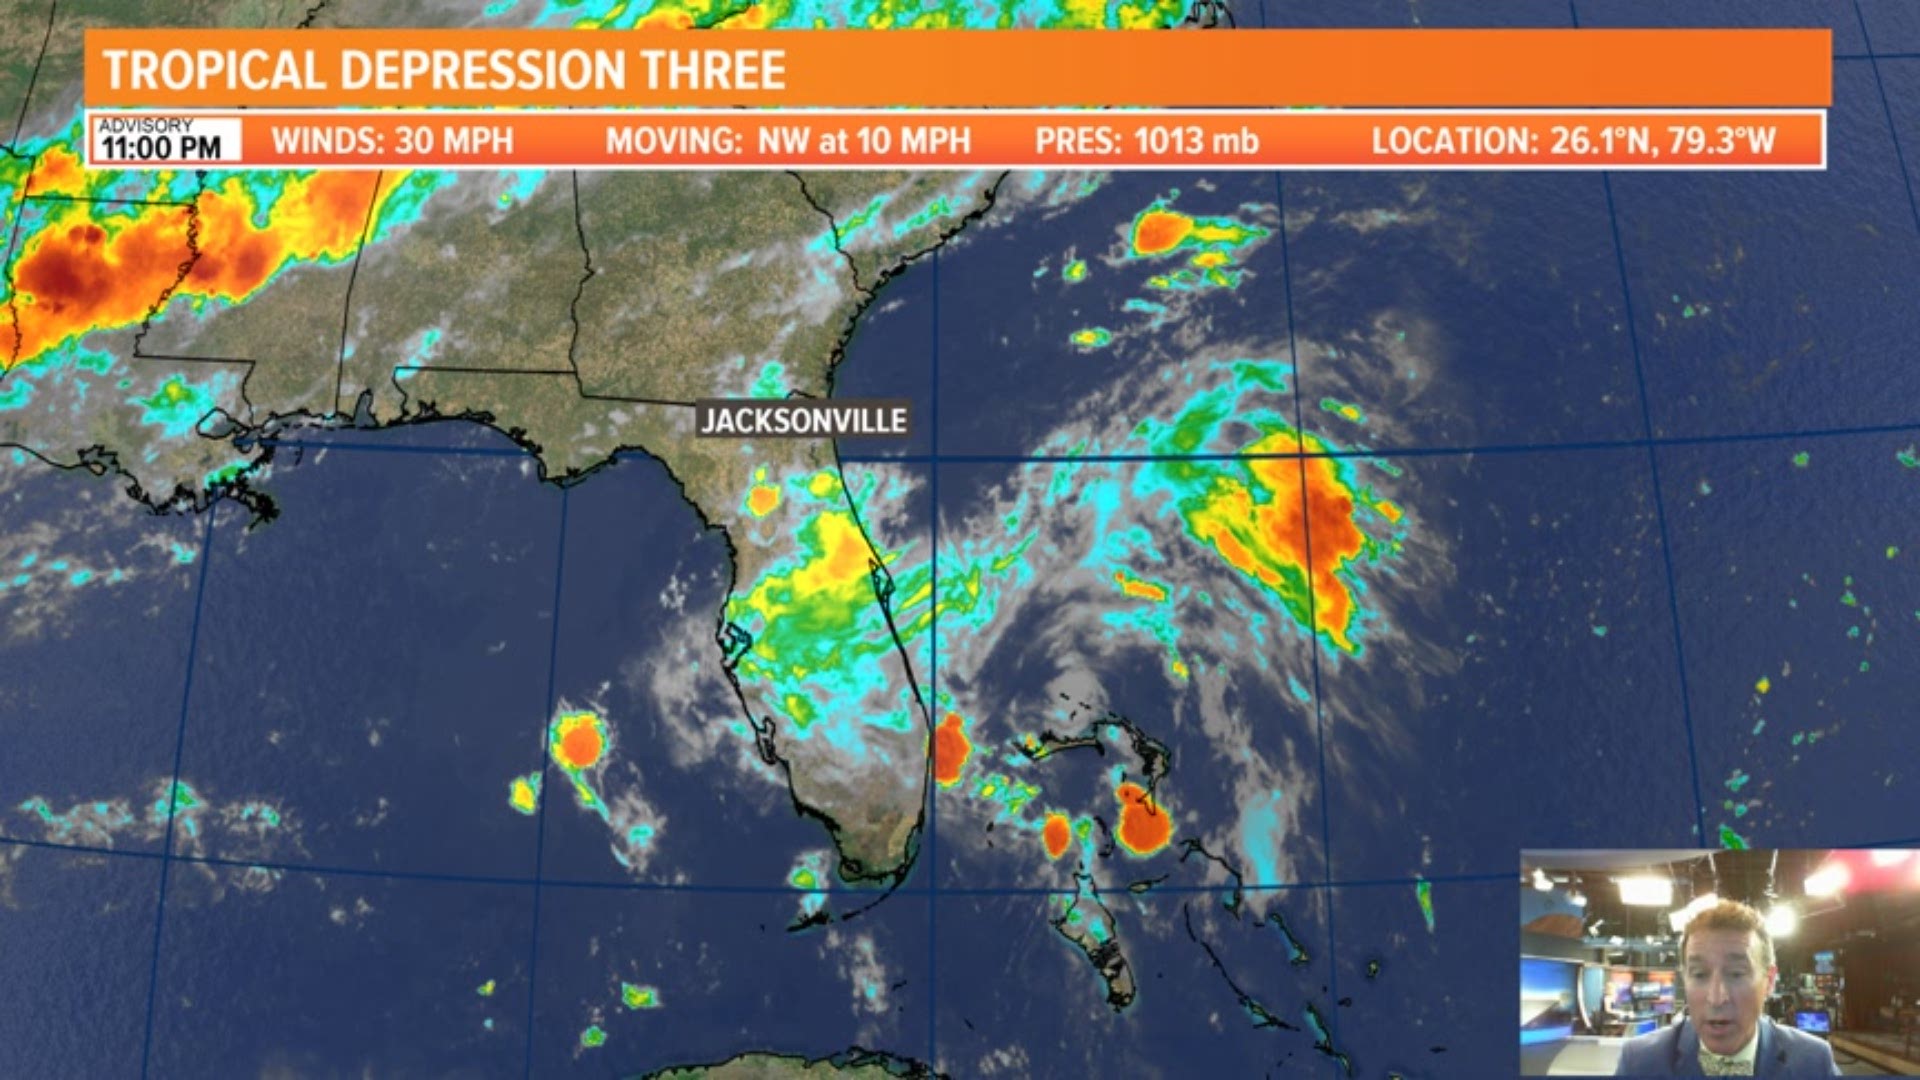 Tropical Depression 3 remains weak and offshore. The main impacts stay east of Florida.